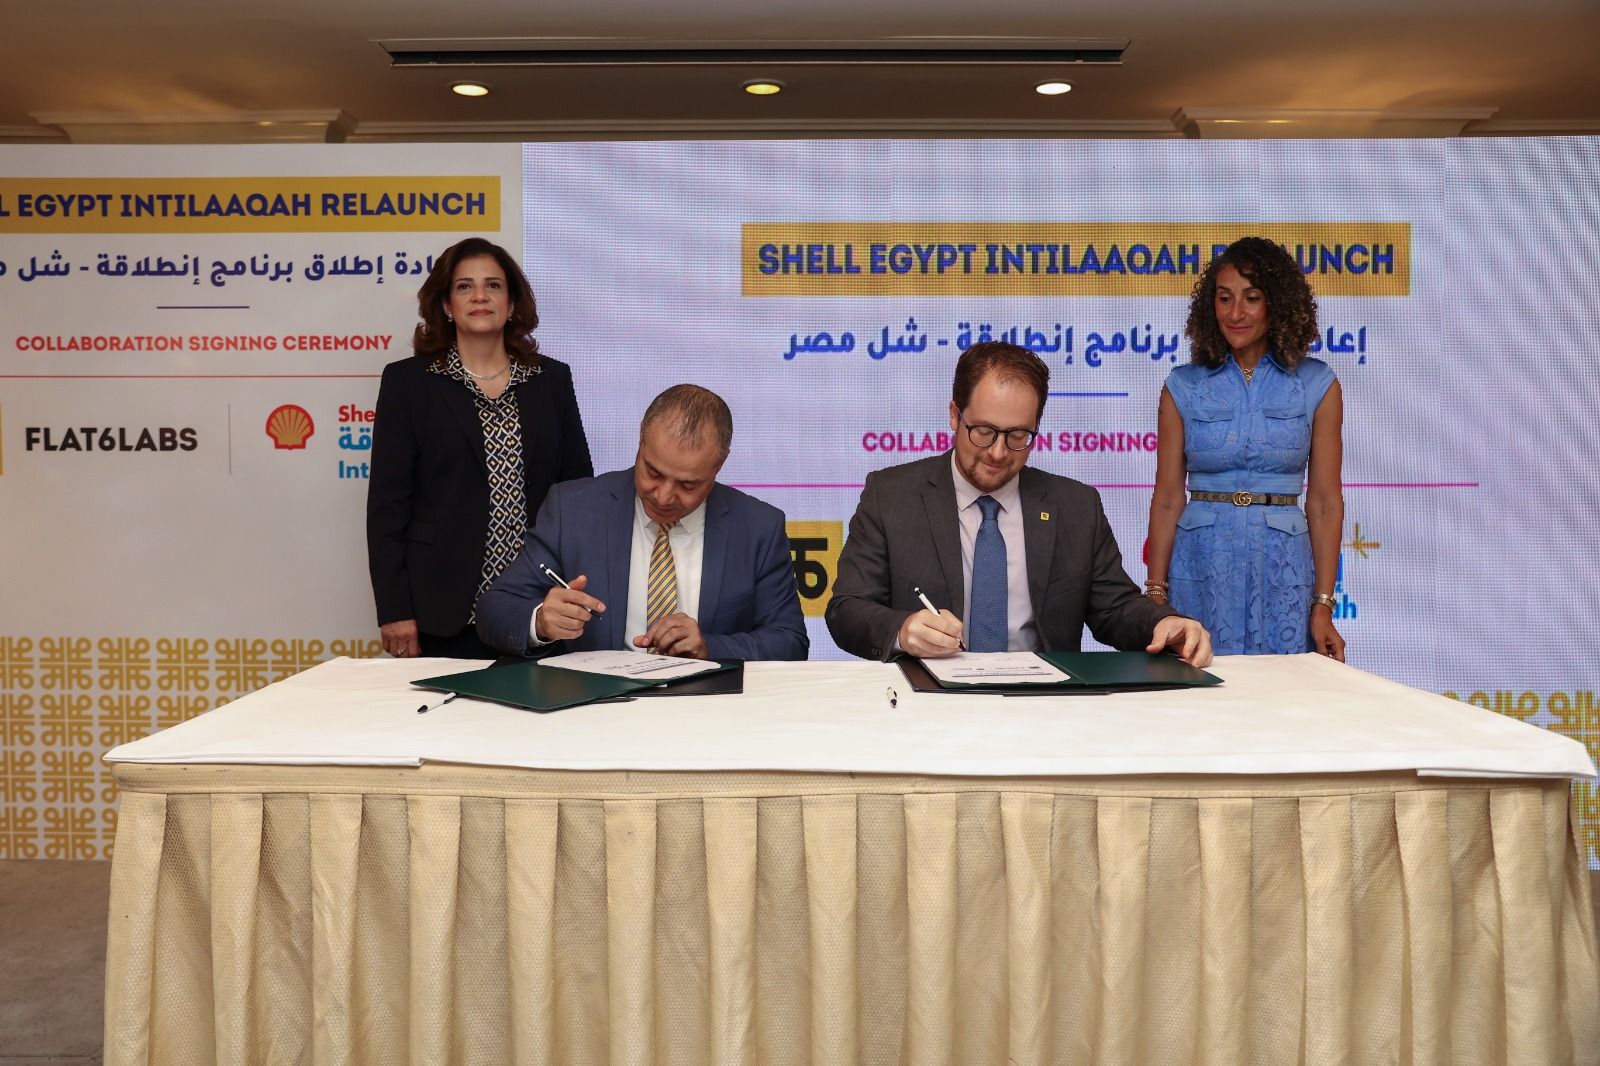 Shell Egypt Relaunches Intilaaqah Programme in Collaboration with Flat6Labs